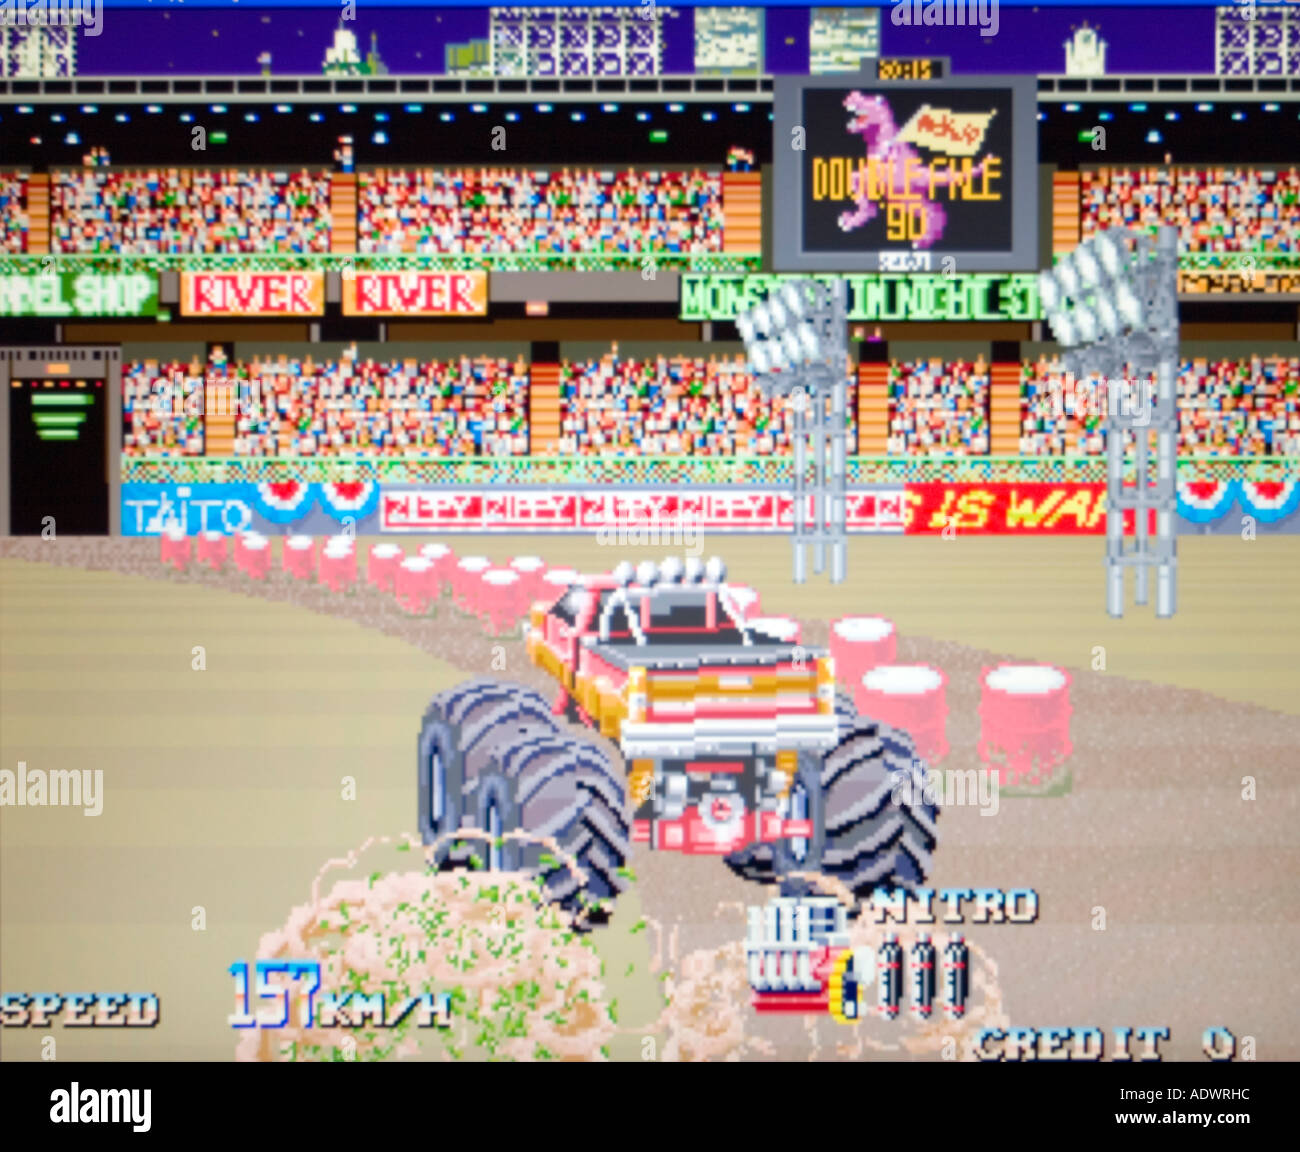 Double Axle Taito 1991 vintage arcade videogame screenshot - EDITORIAL USE ONLY Stock Photo